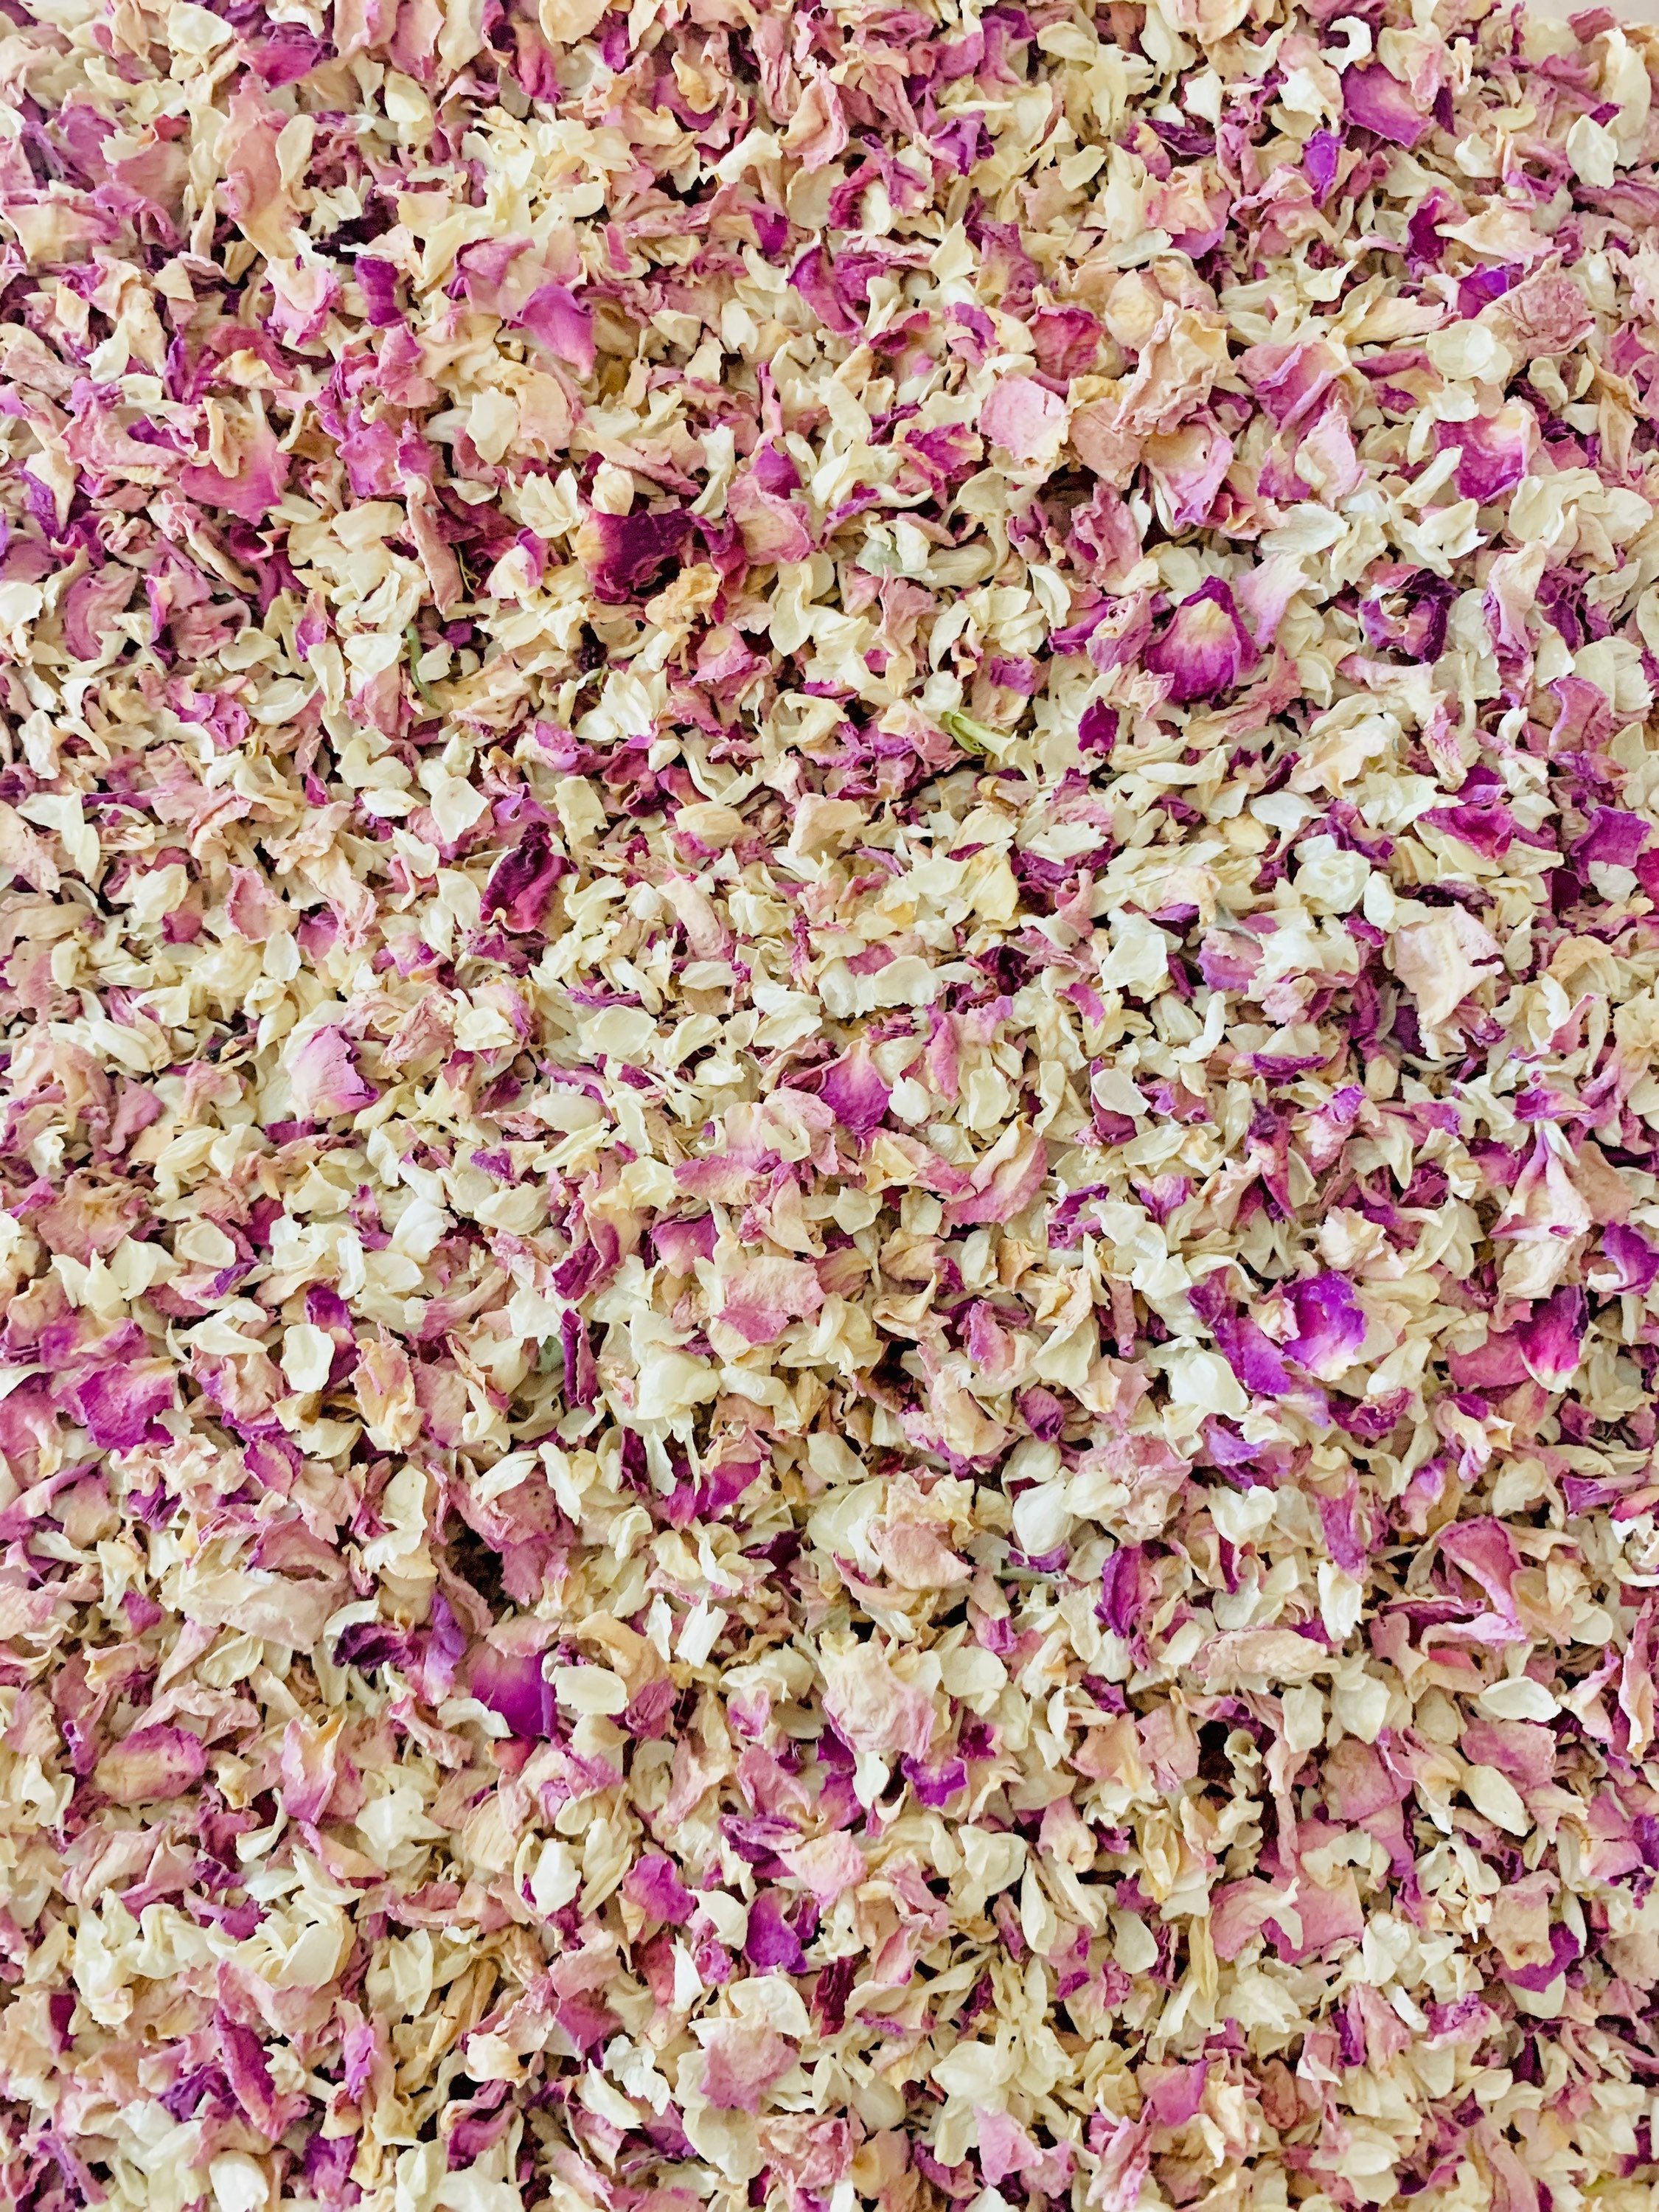 Biodegradable Confetti Wedding Petals Pink Rose Dries Natural Eco X 50 Packets 